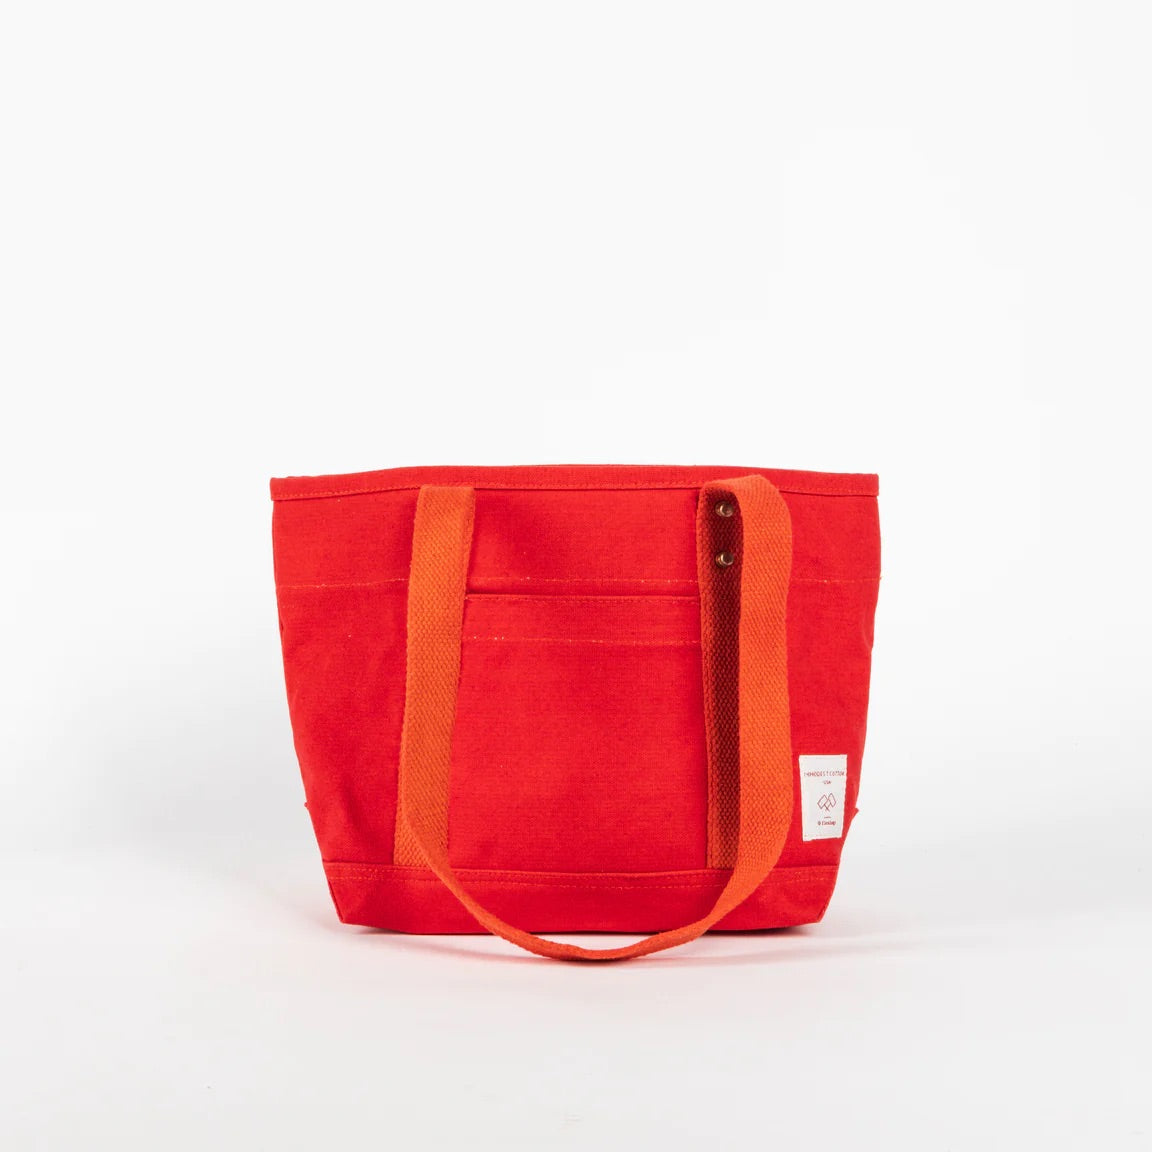 Lunch Tote- Persimmon